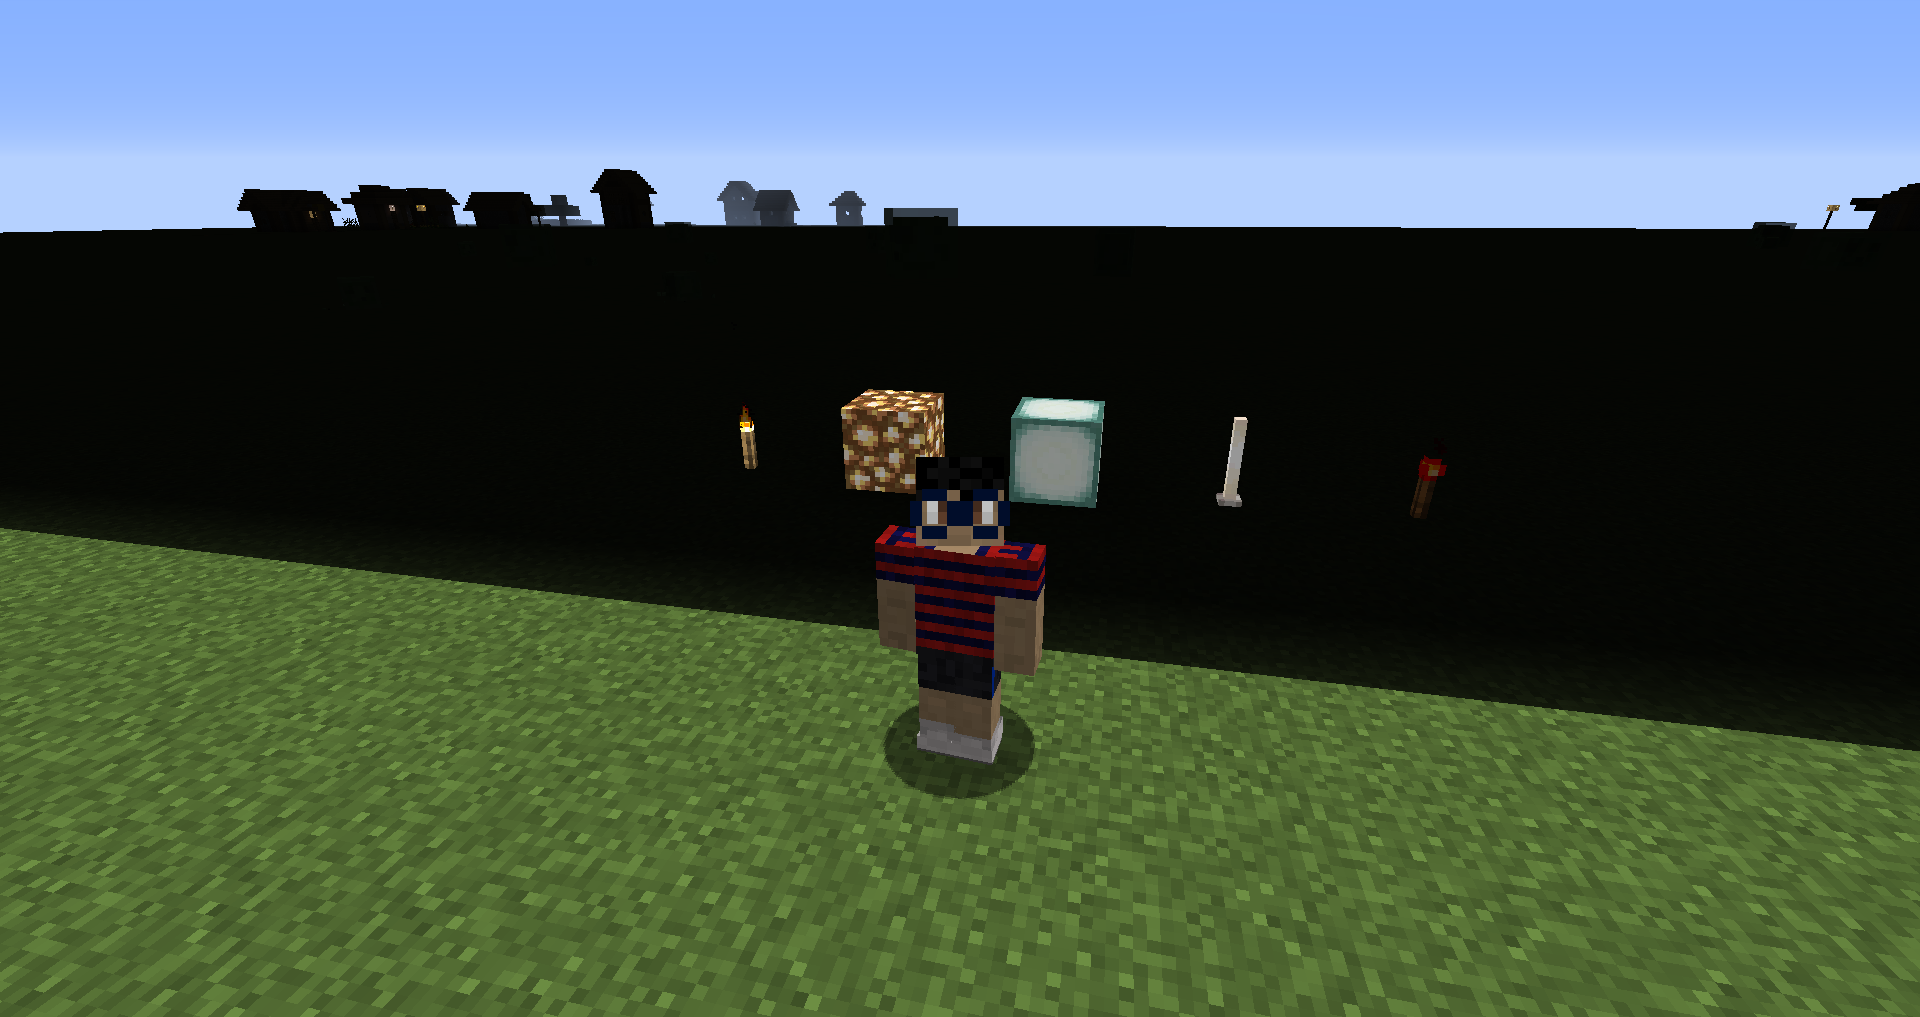 The new lighting engine added in 1.14 causes light to ...